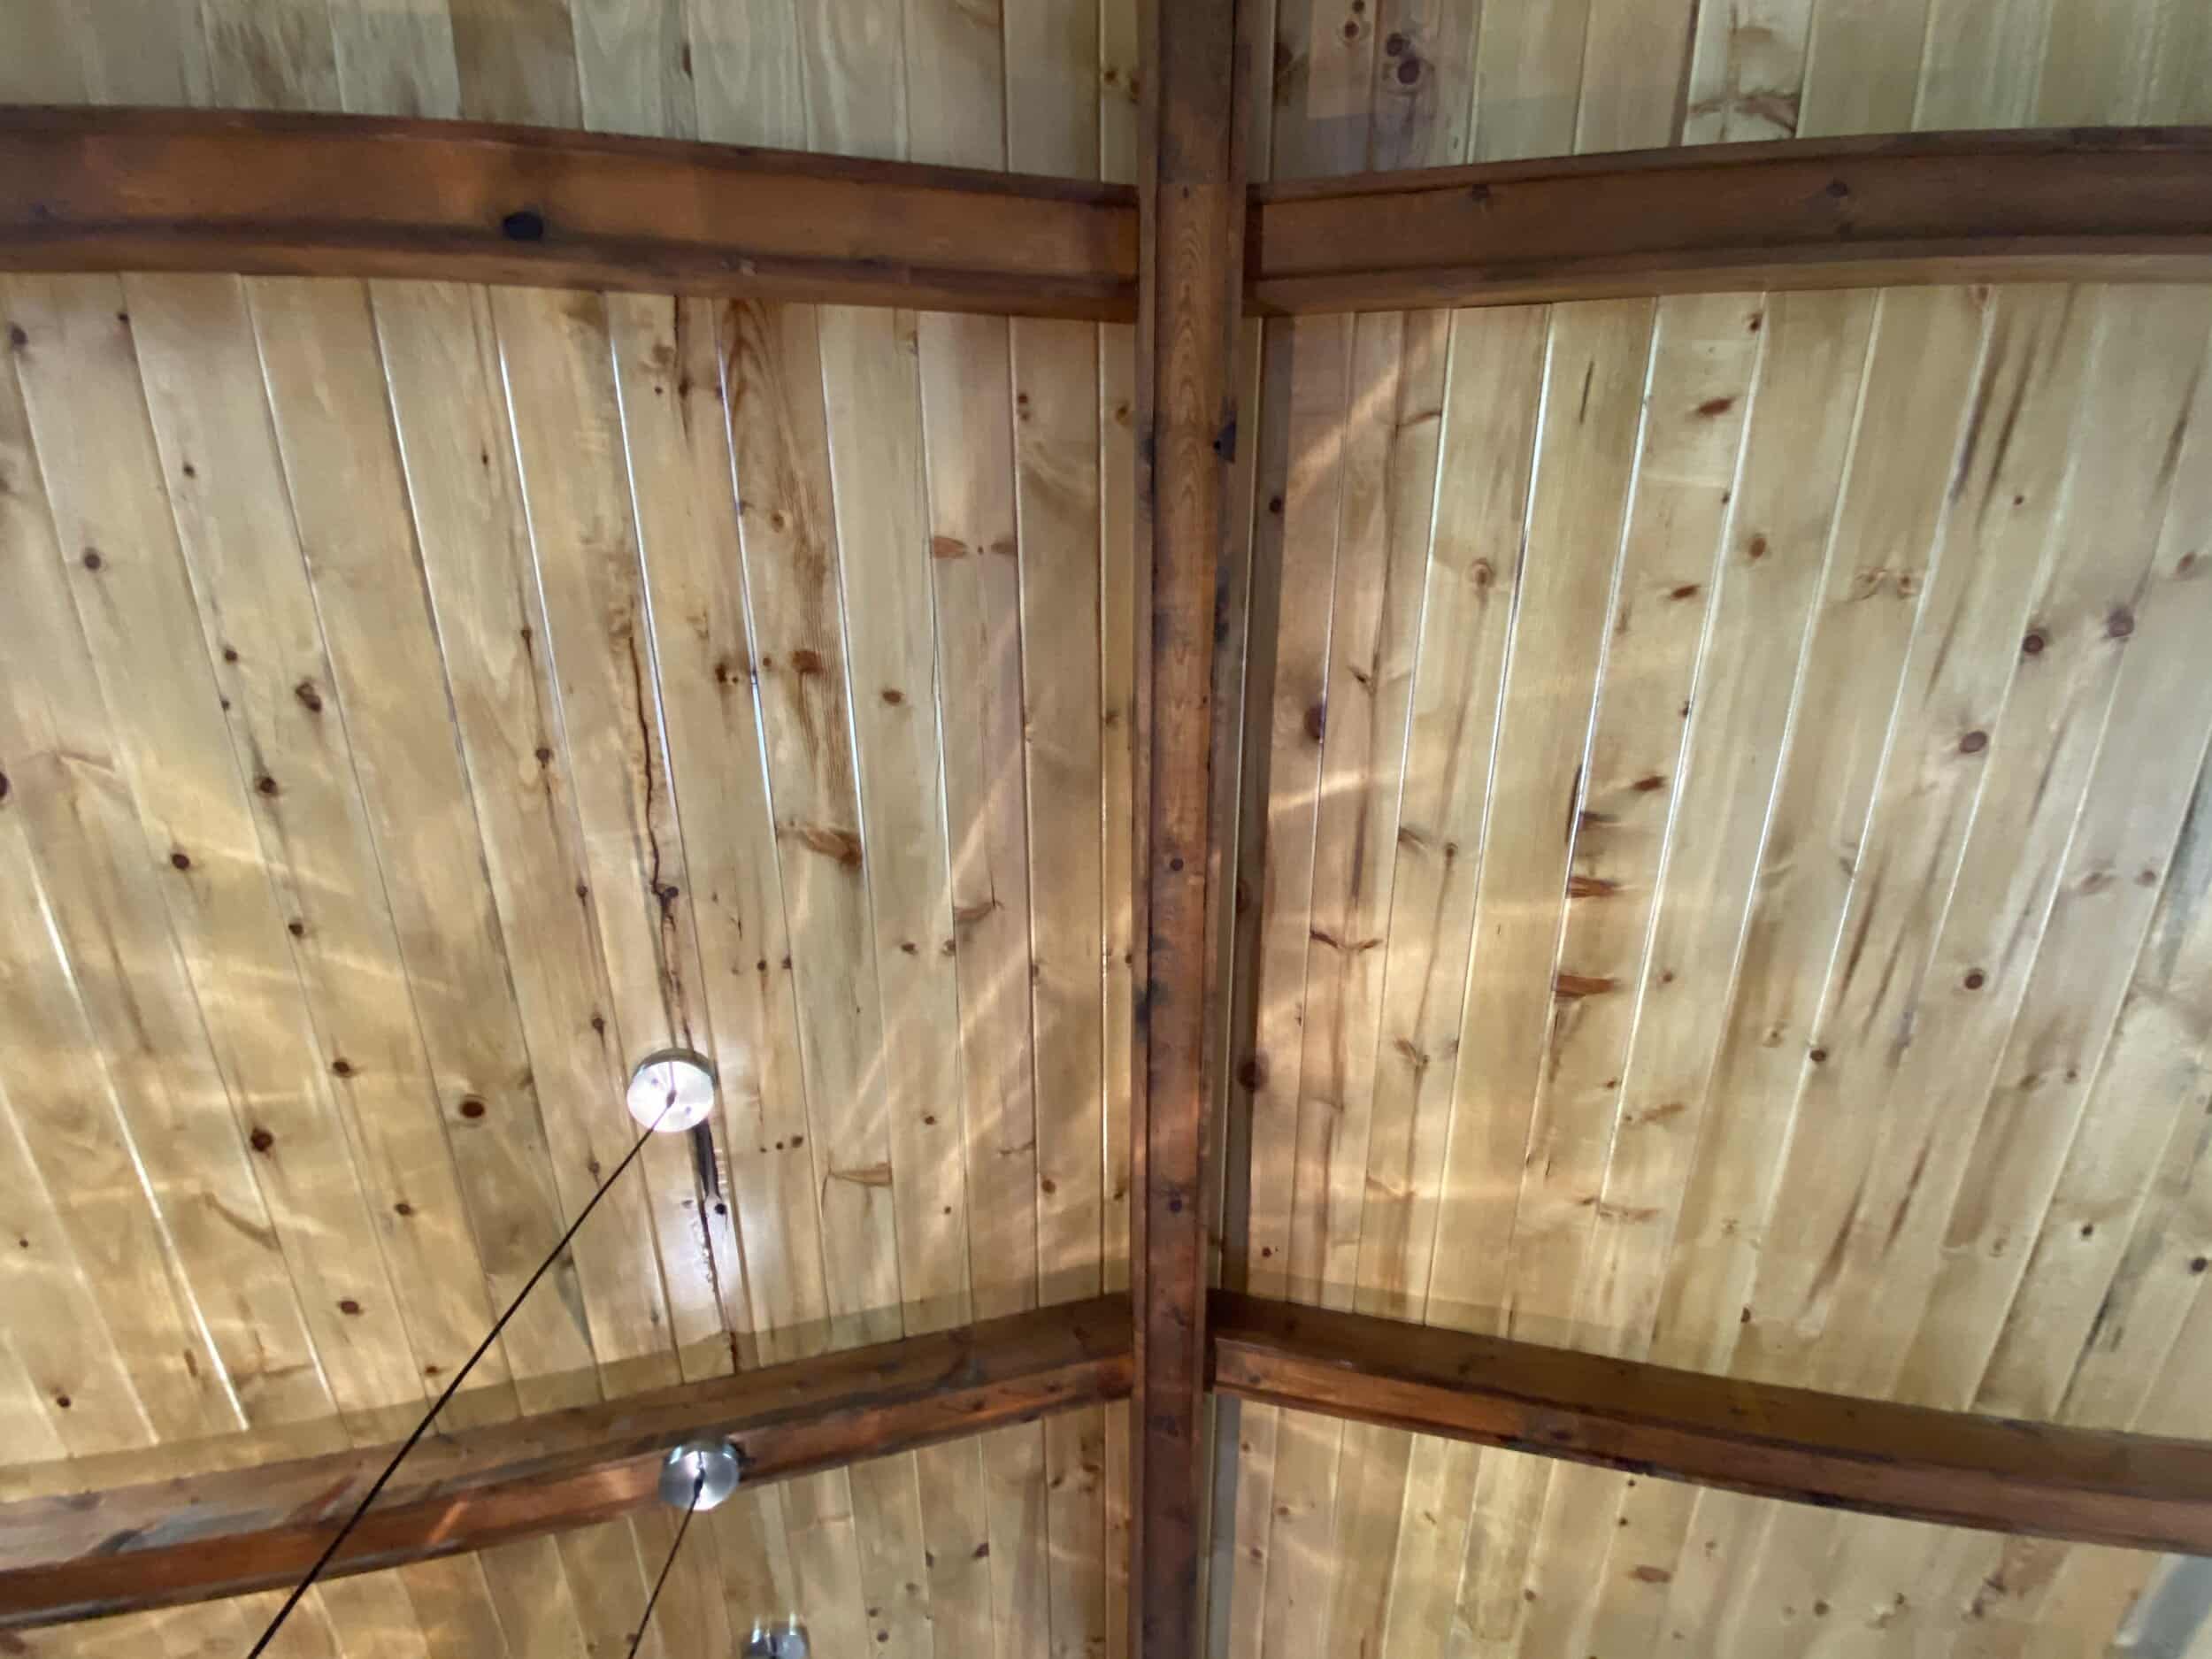 Vaulted wooden ceilings with support beams